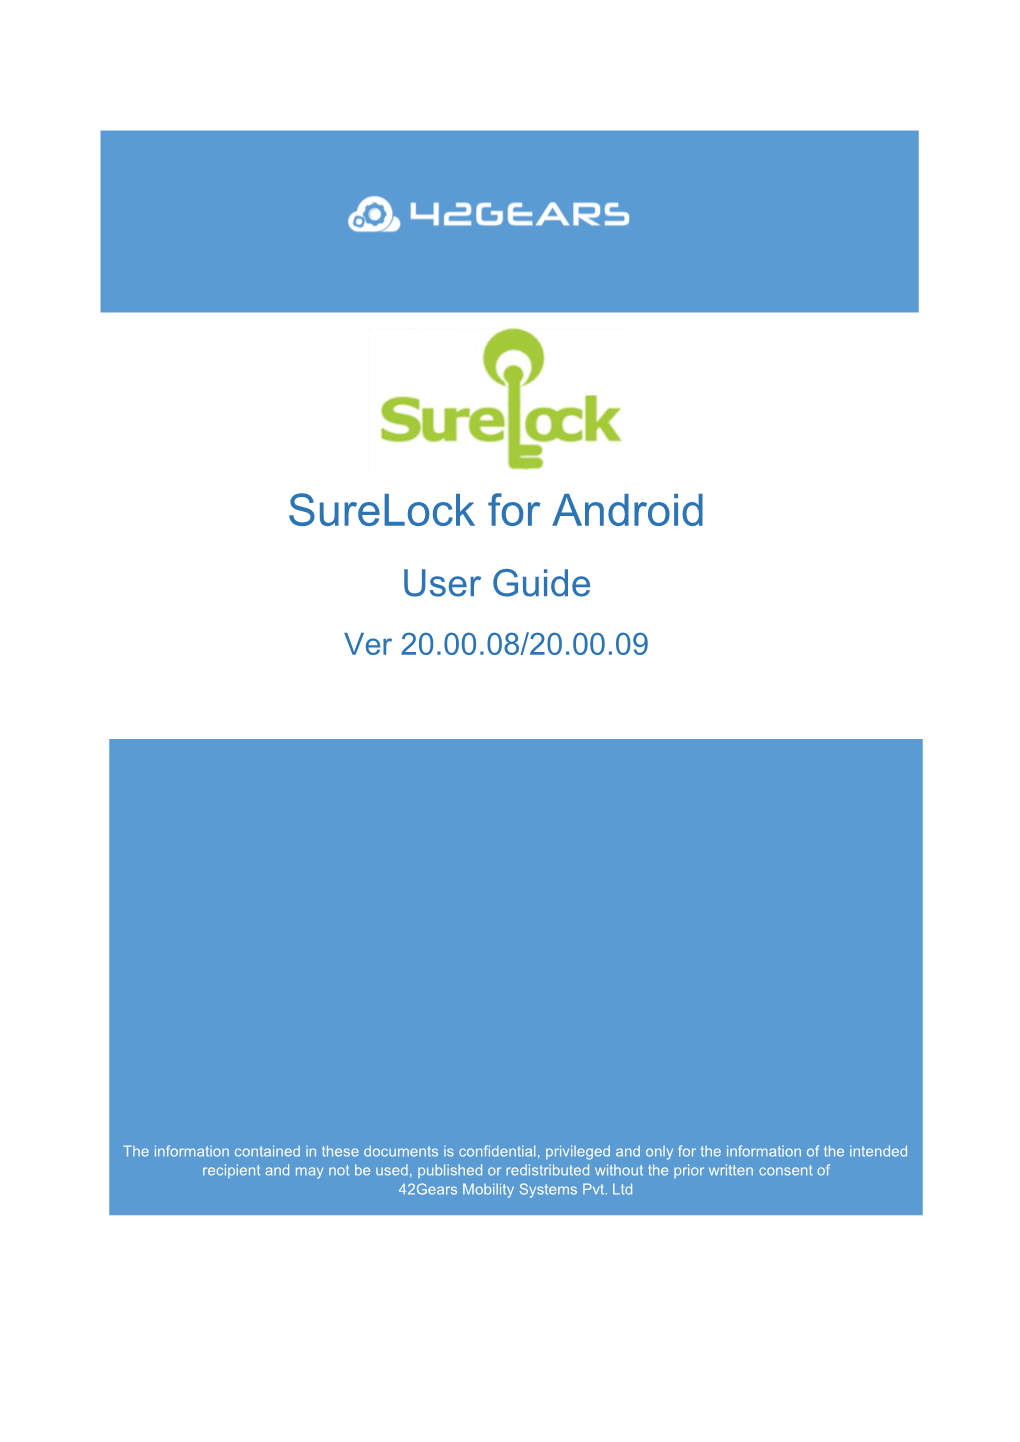 Surelock for Android User Guide Ver 20.00.08/20.00.09